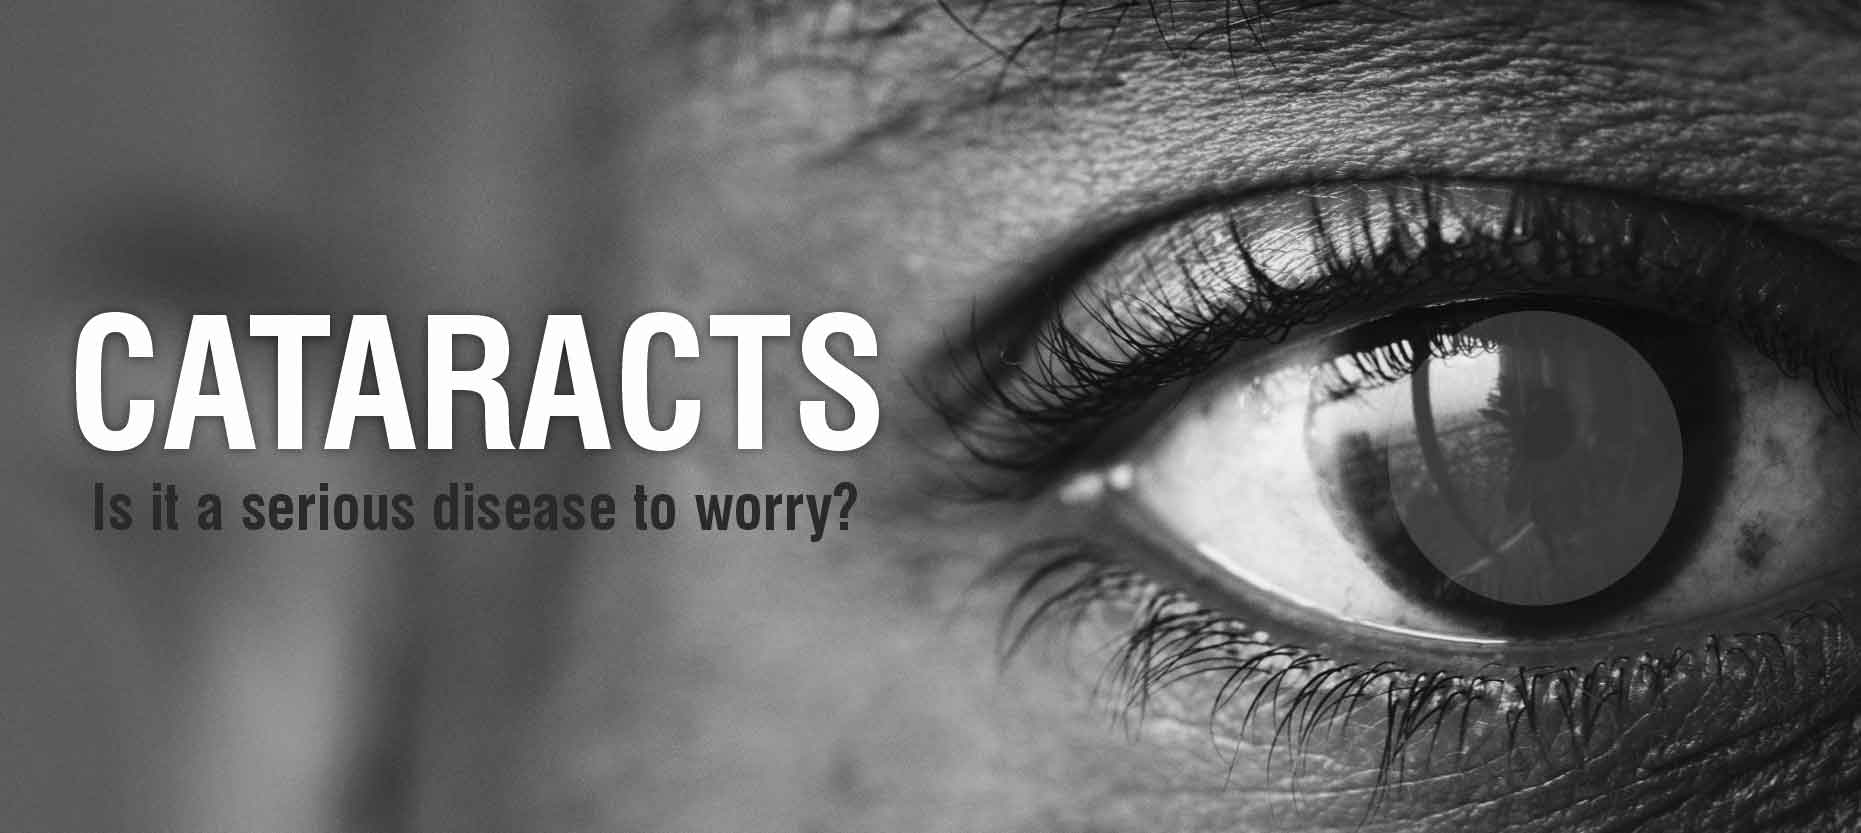 Cataracts: Is it a serious disease to worry?